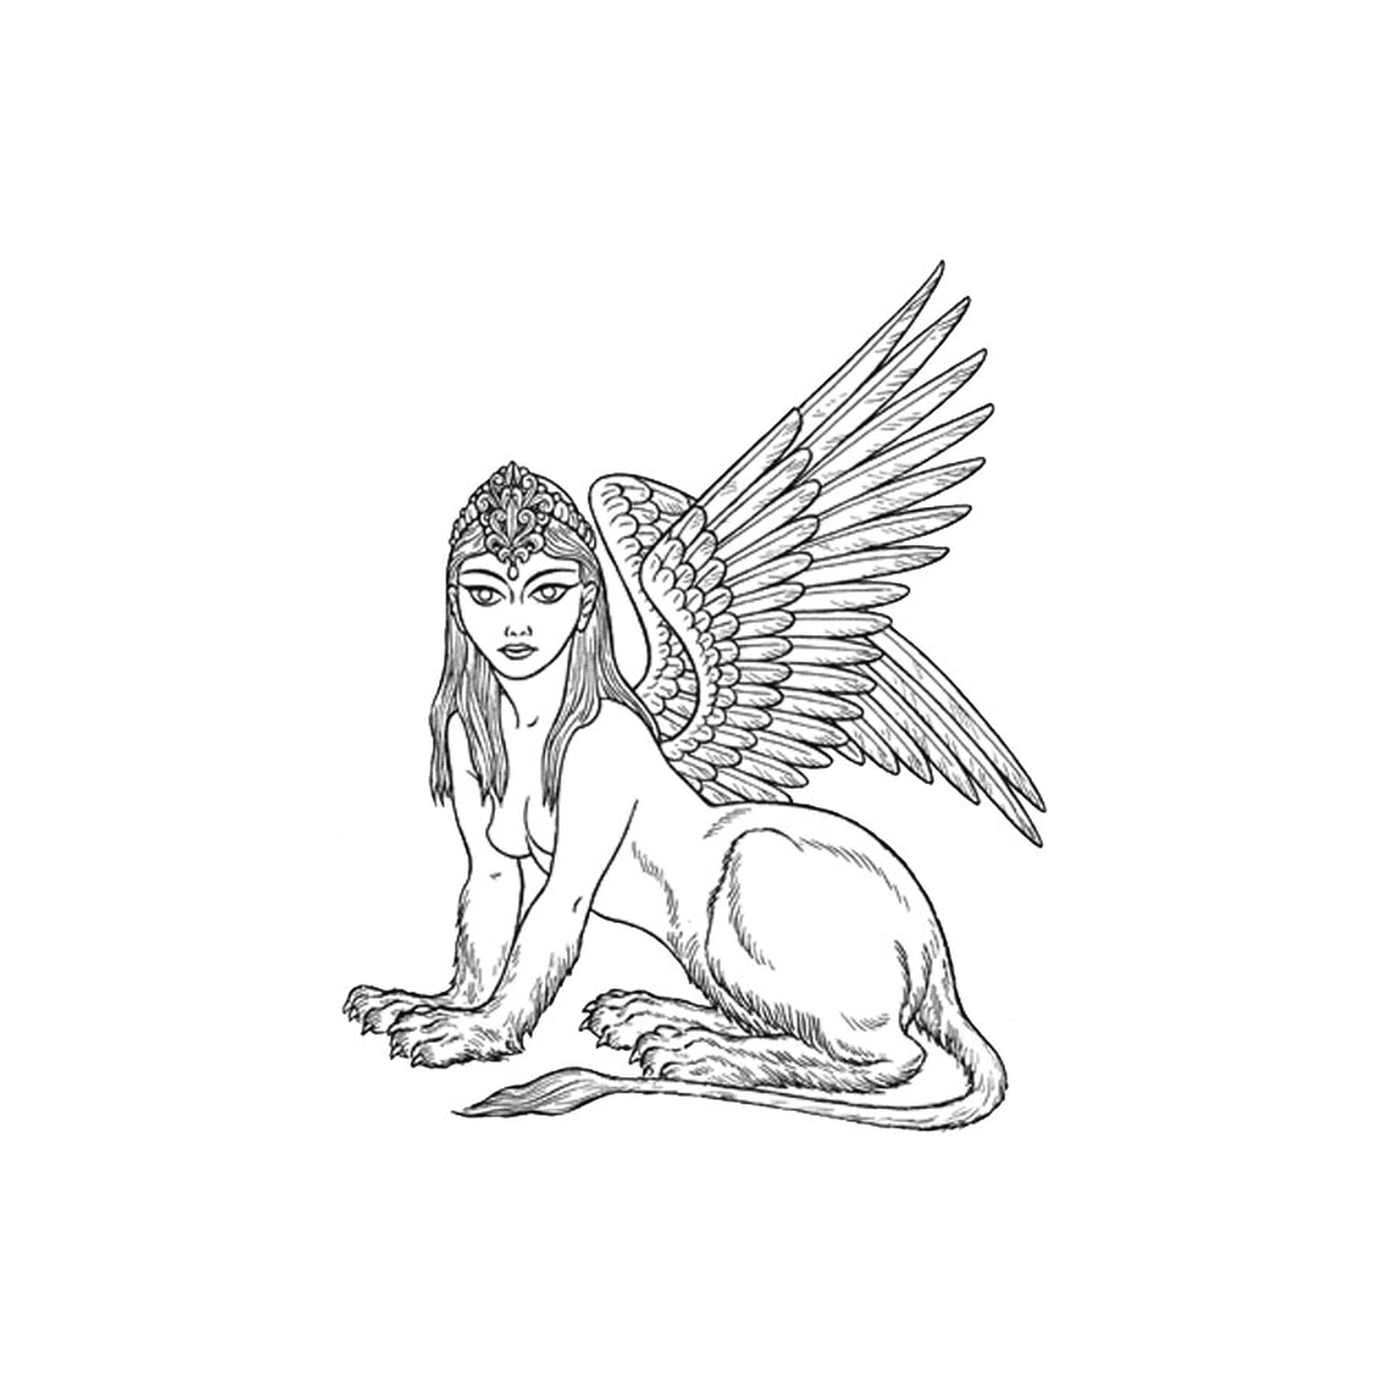  A sphinx with a bird on its head 